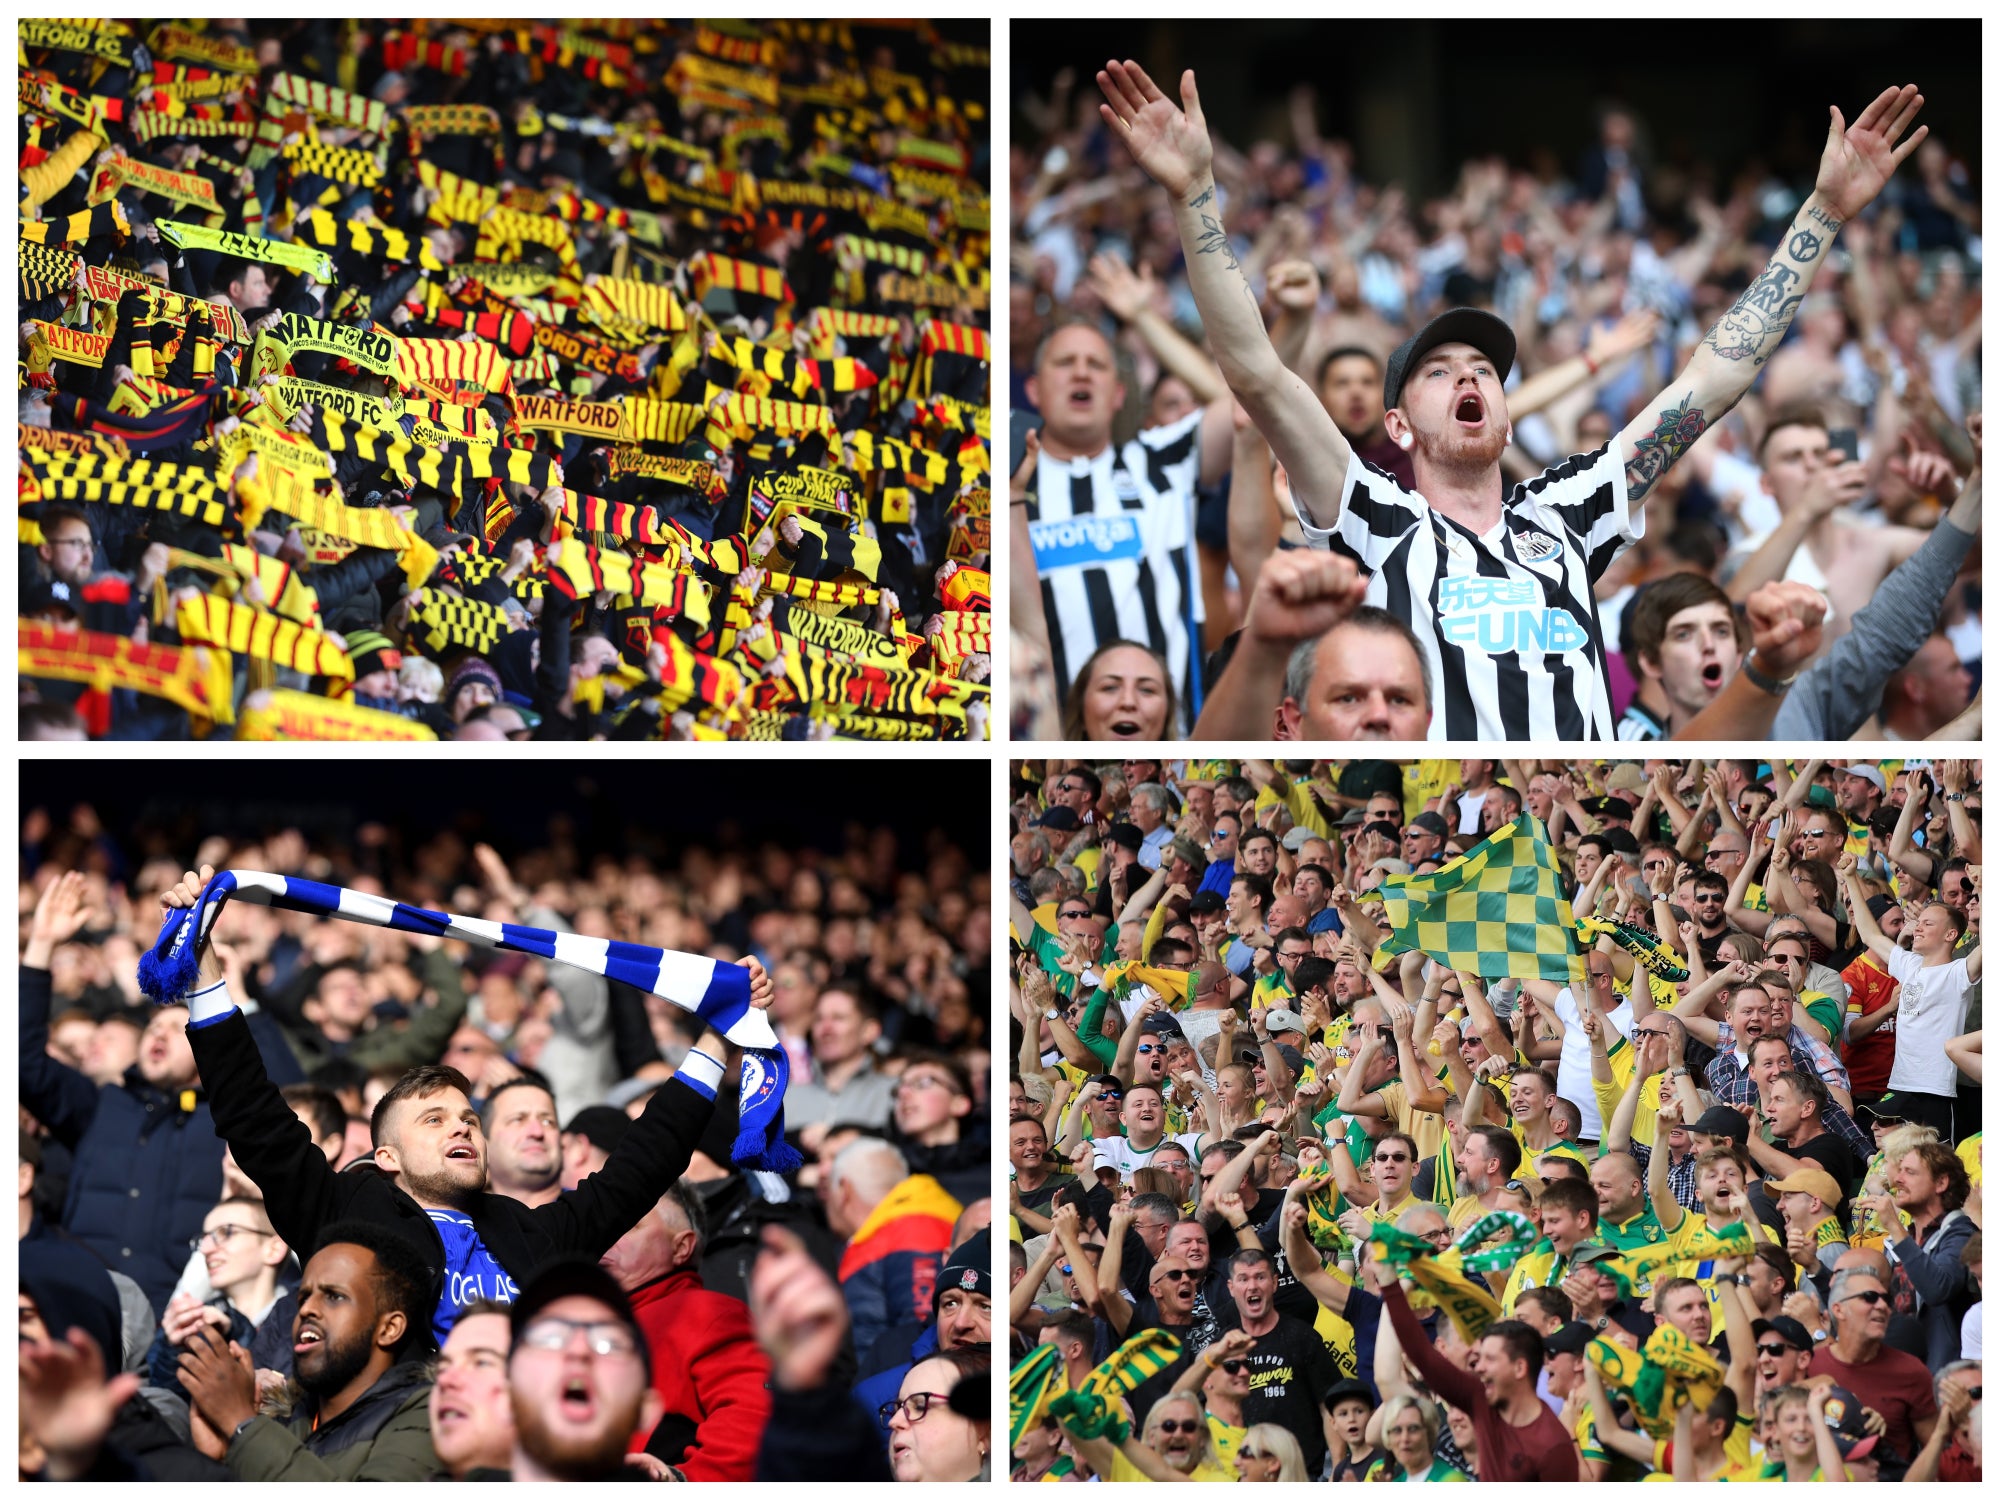 The vast majority of clubs have committed to refunding season ticket holders